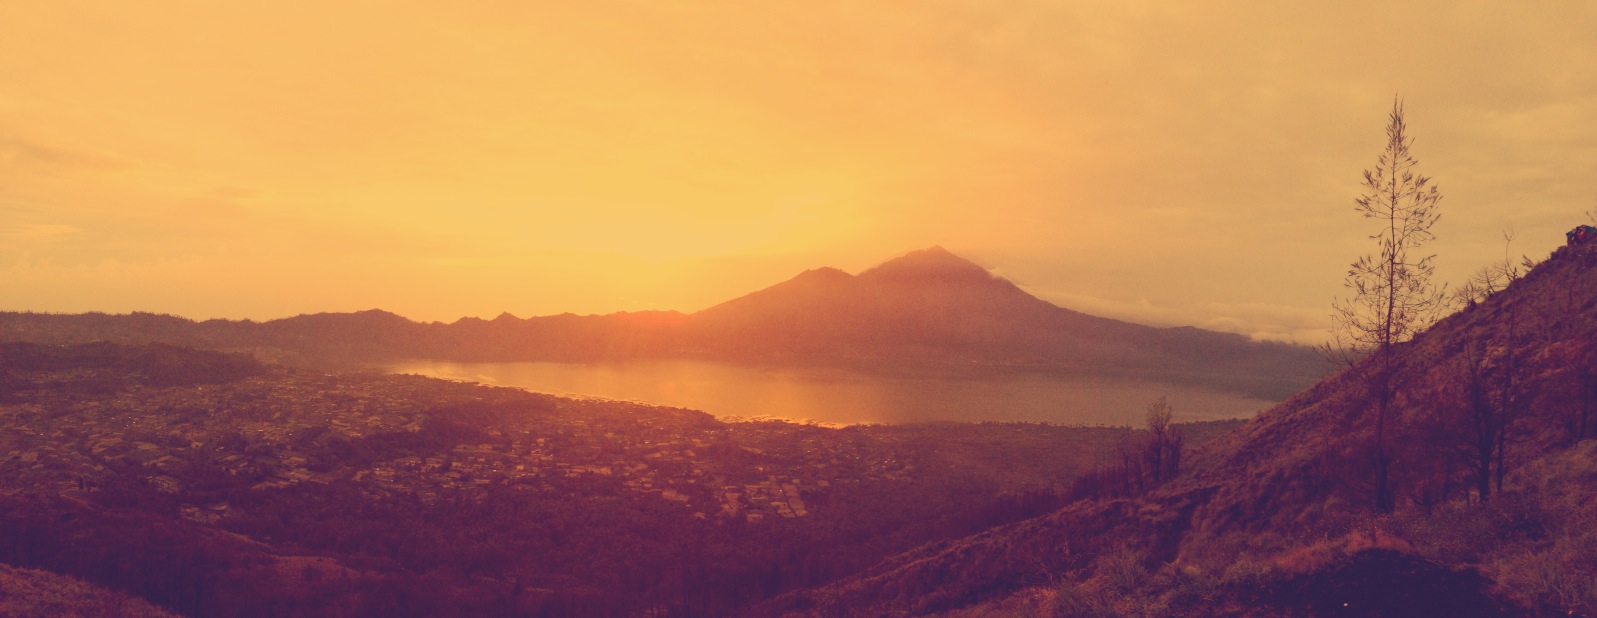 Morning Glory: From Where I Stand, Mt. Batur, Bali.